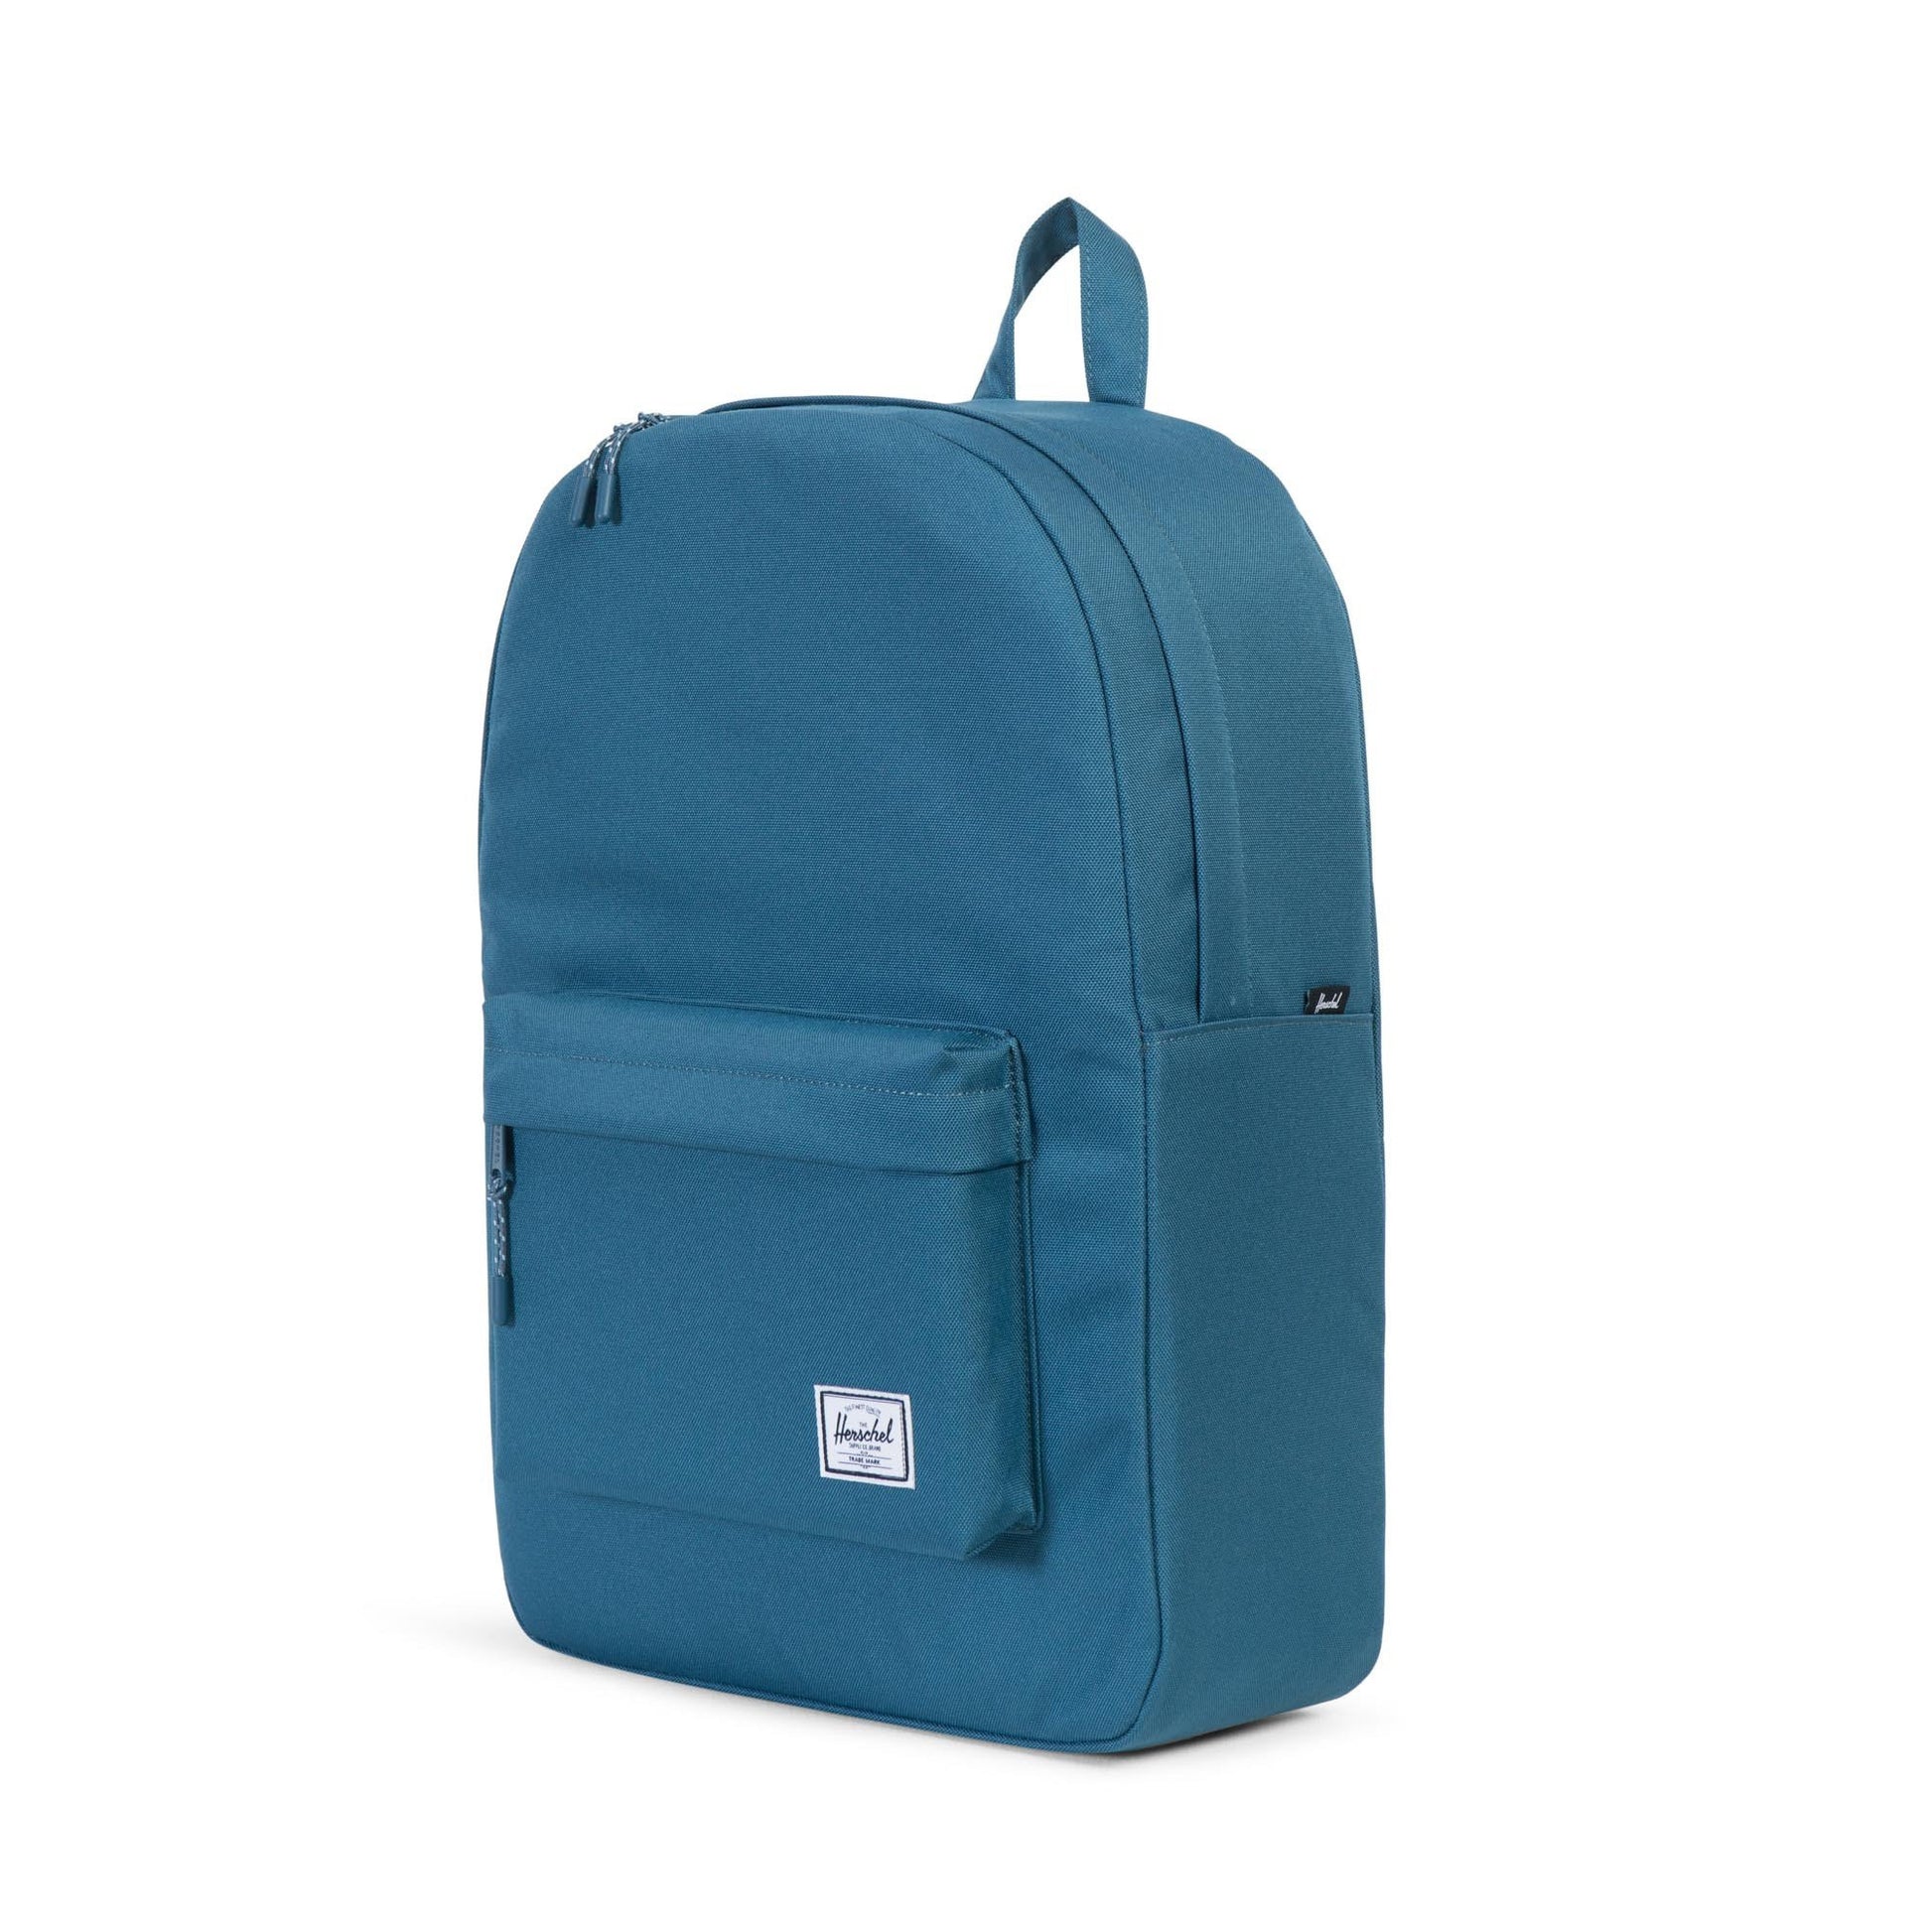 Herschel Supply Co. - Classic Backpack, Indian Teal - The Giant Peach